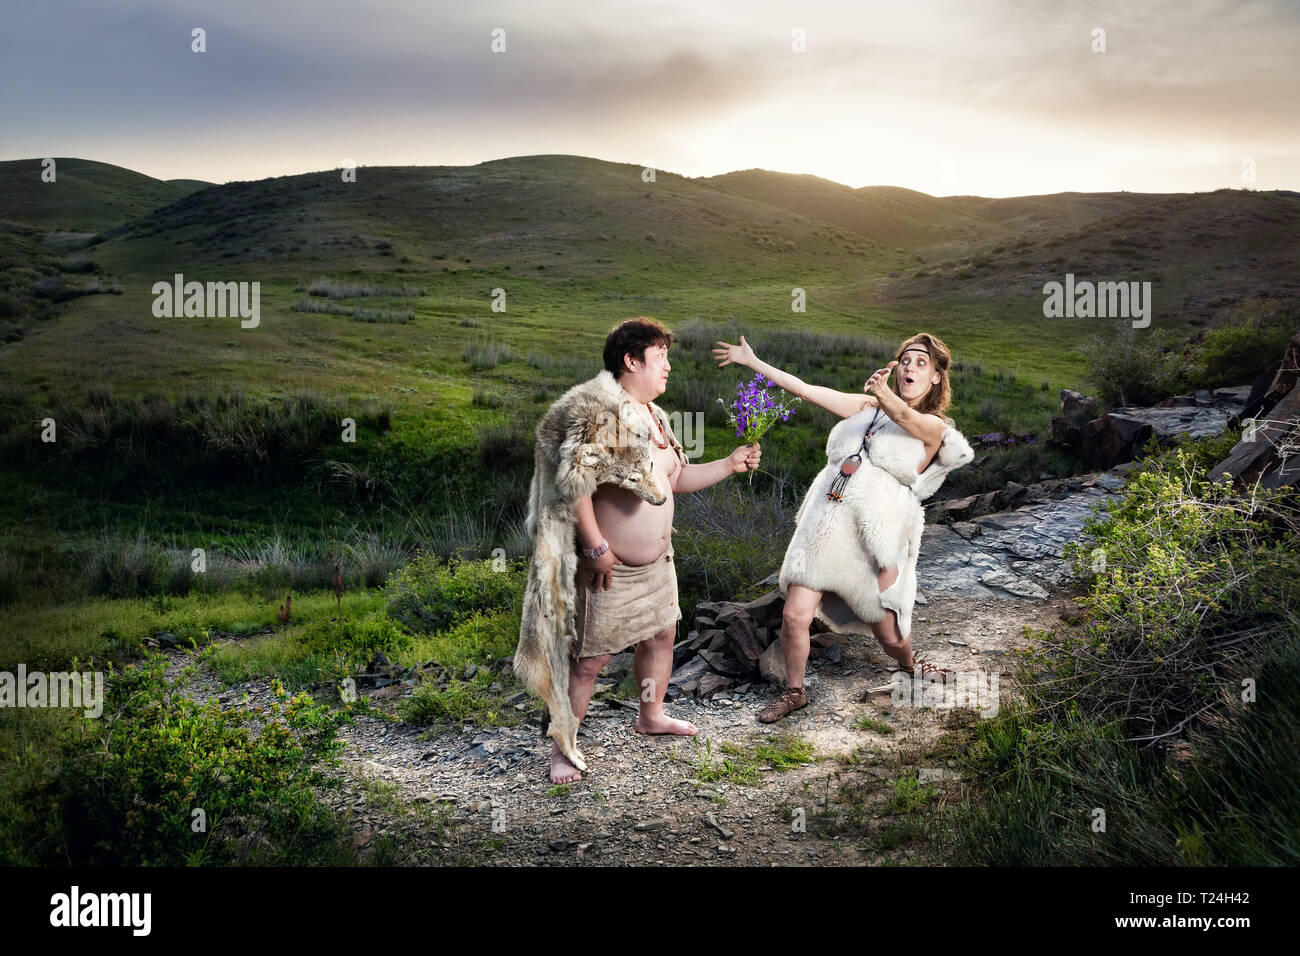 Primitive caveman dressed in animal skin giving flowers to happy cave woman in the mountains Stock Photo